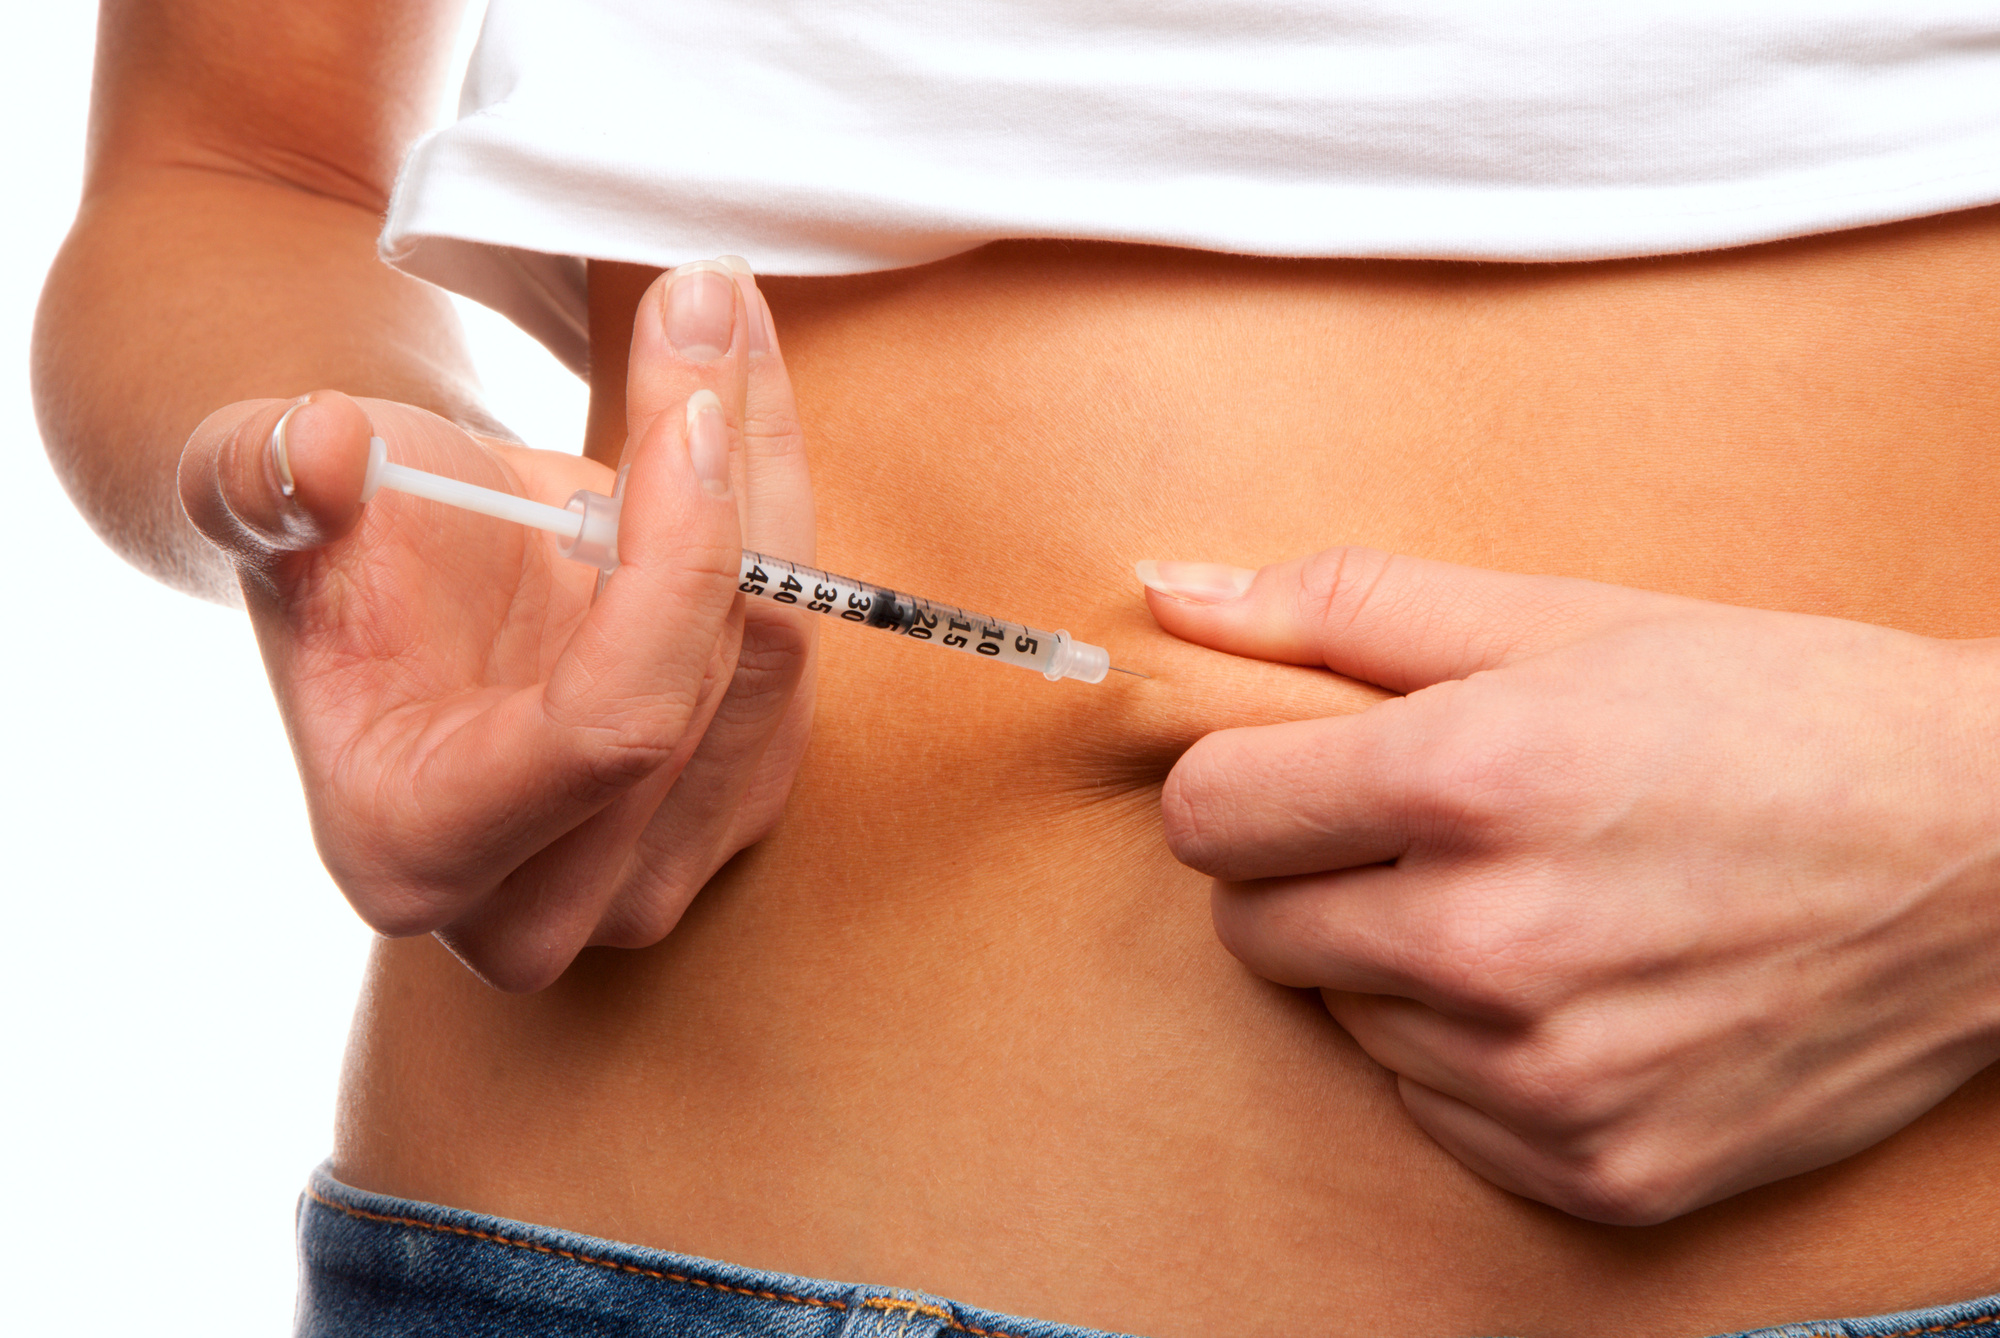 Giving yoectionurself an insulin injection might seem daunting, but the process is simple. Learn the correct steps to take here.